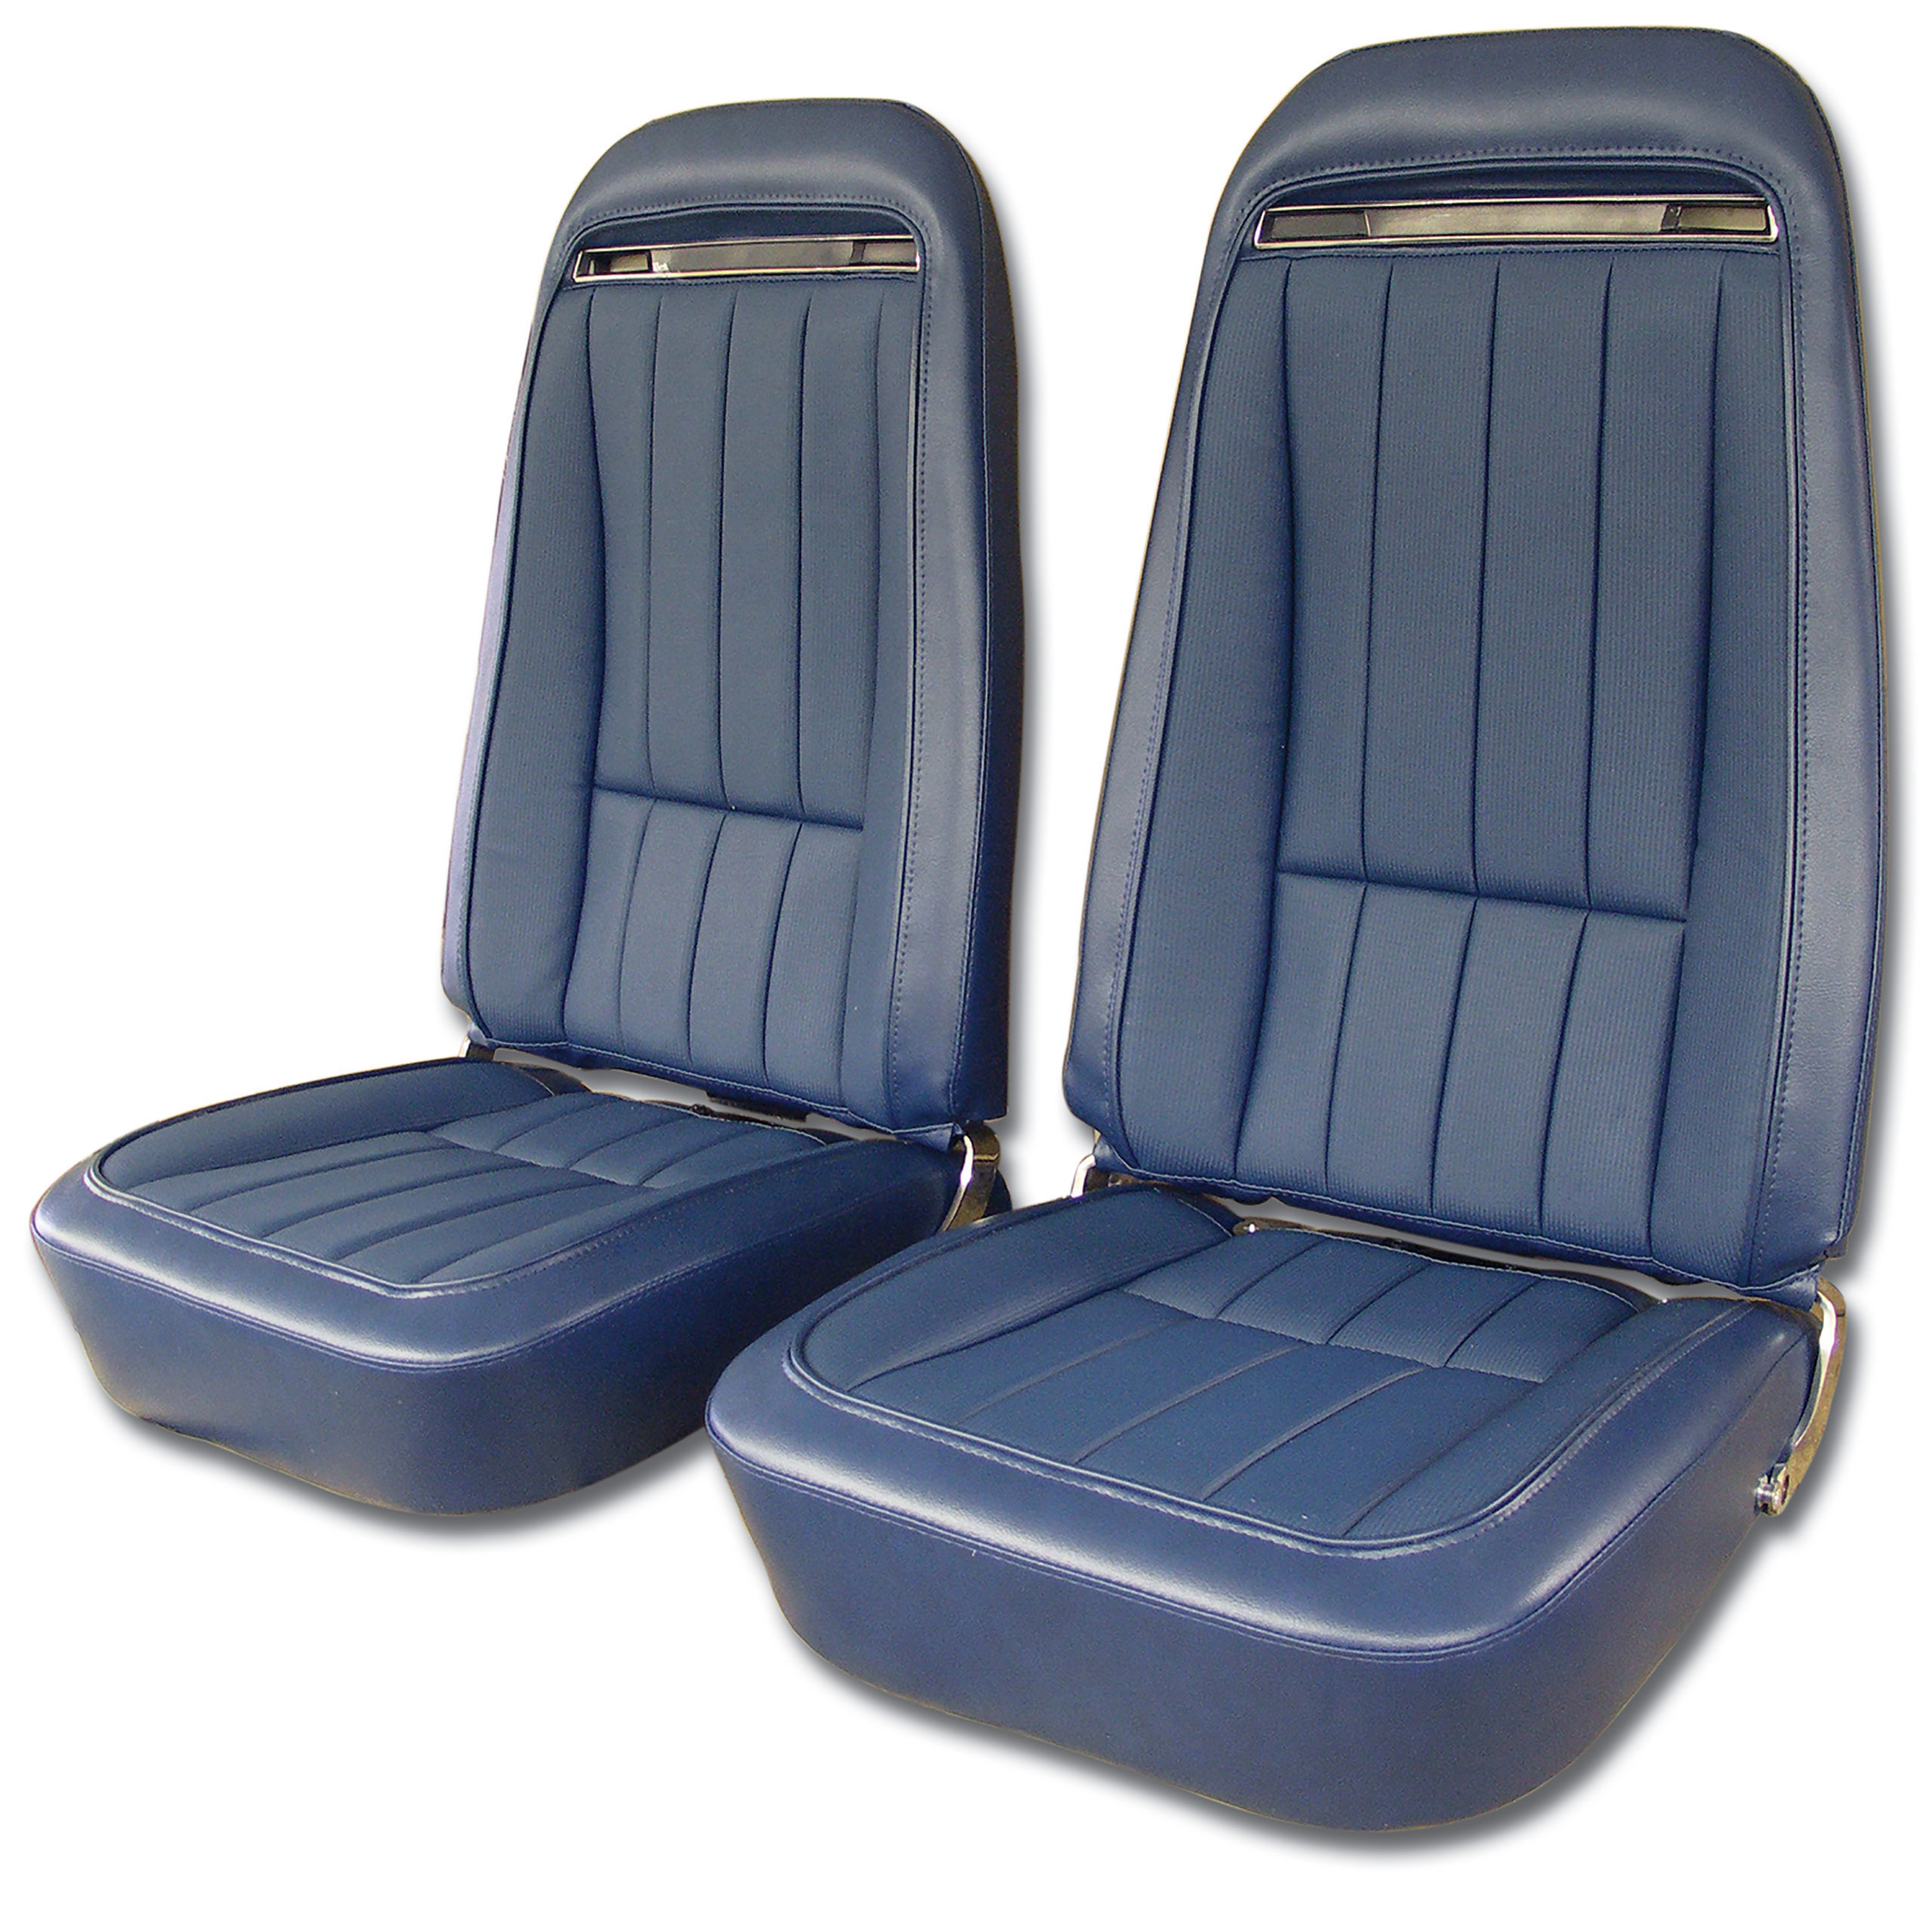 1971 C3 Corvette Mounted Seats Royal Blue "Leather-Like" Vinyl Without Shoulder Harness